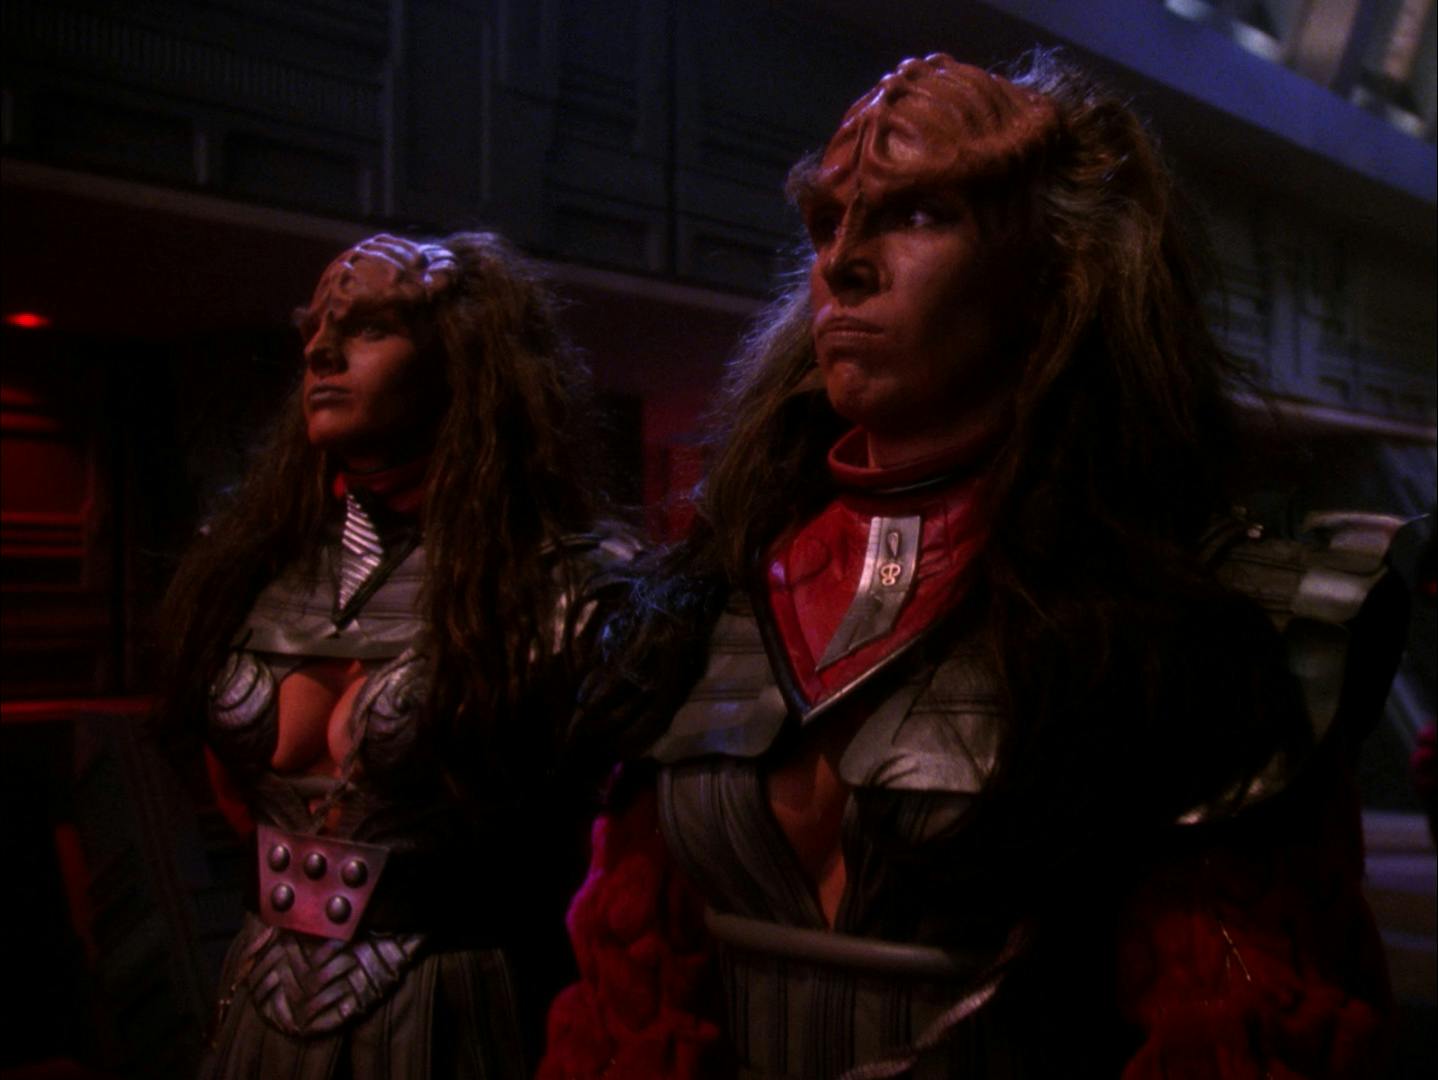 The Duras Sisters - Lursa and B'Etor - stands before the Klingon High Council in 'Redemption'